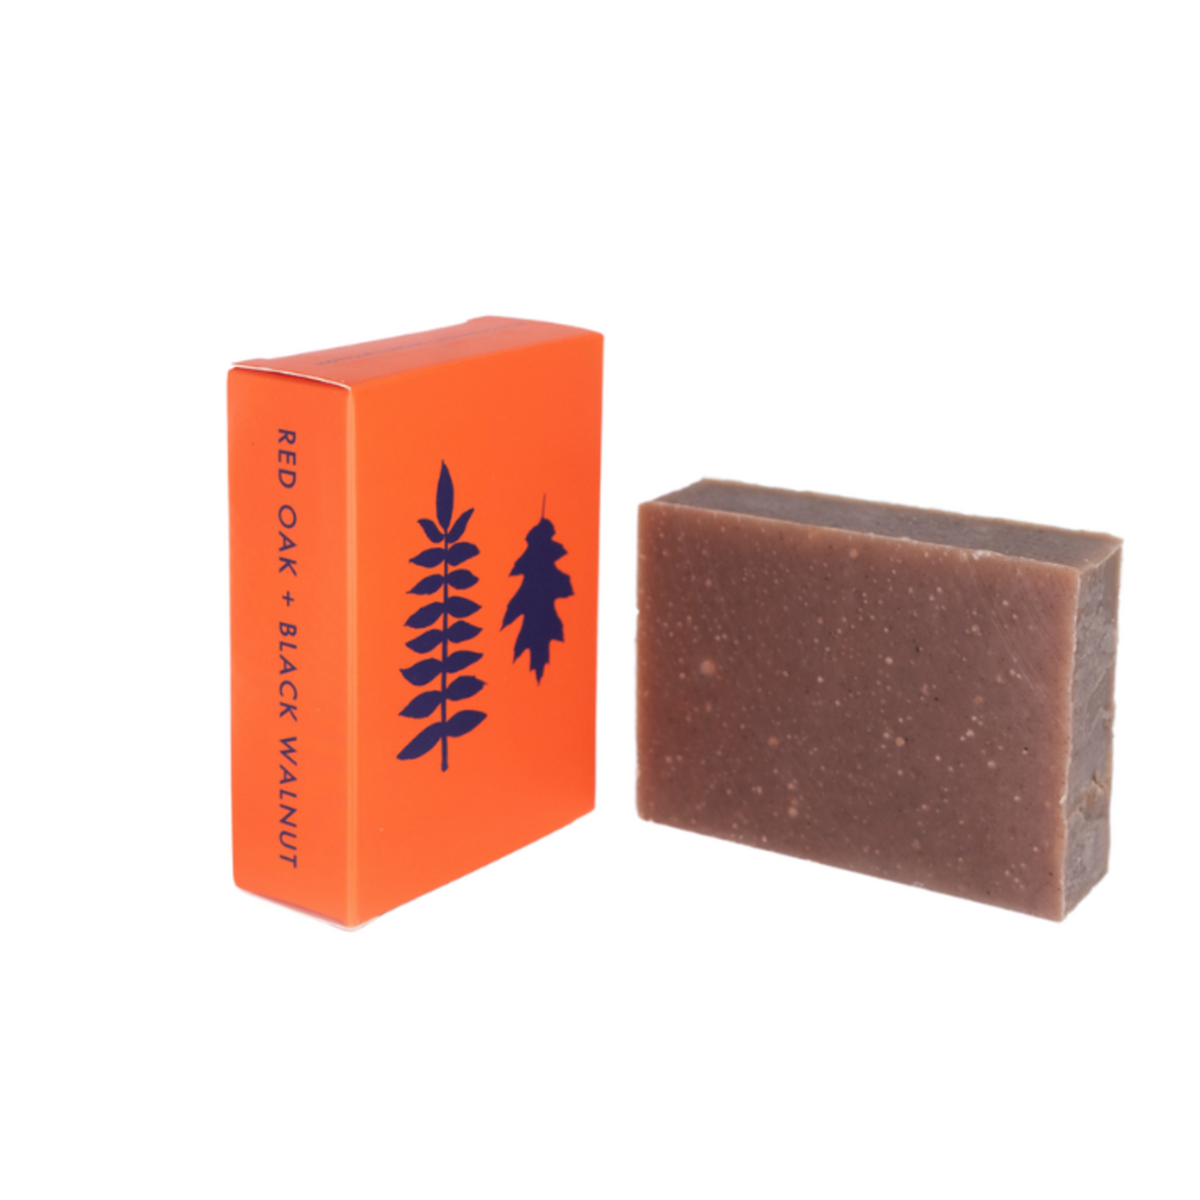 Primary Image of ALTR Red Oak and Black Walnut Soap Bar (120 g) 